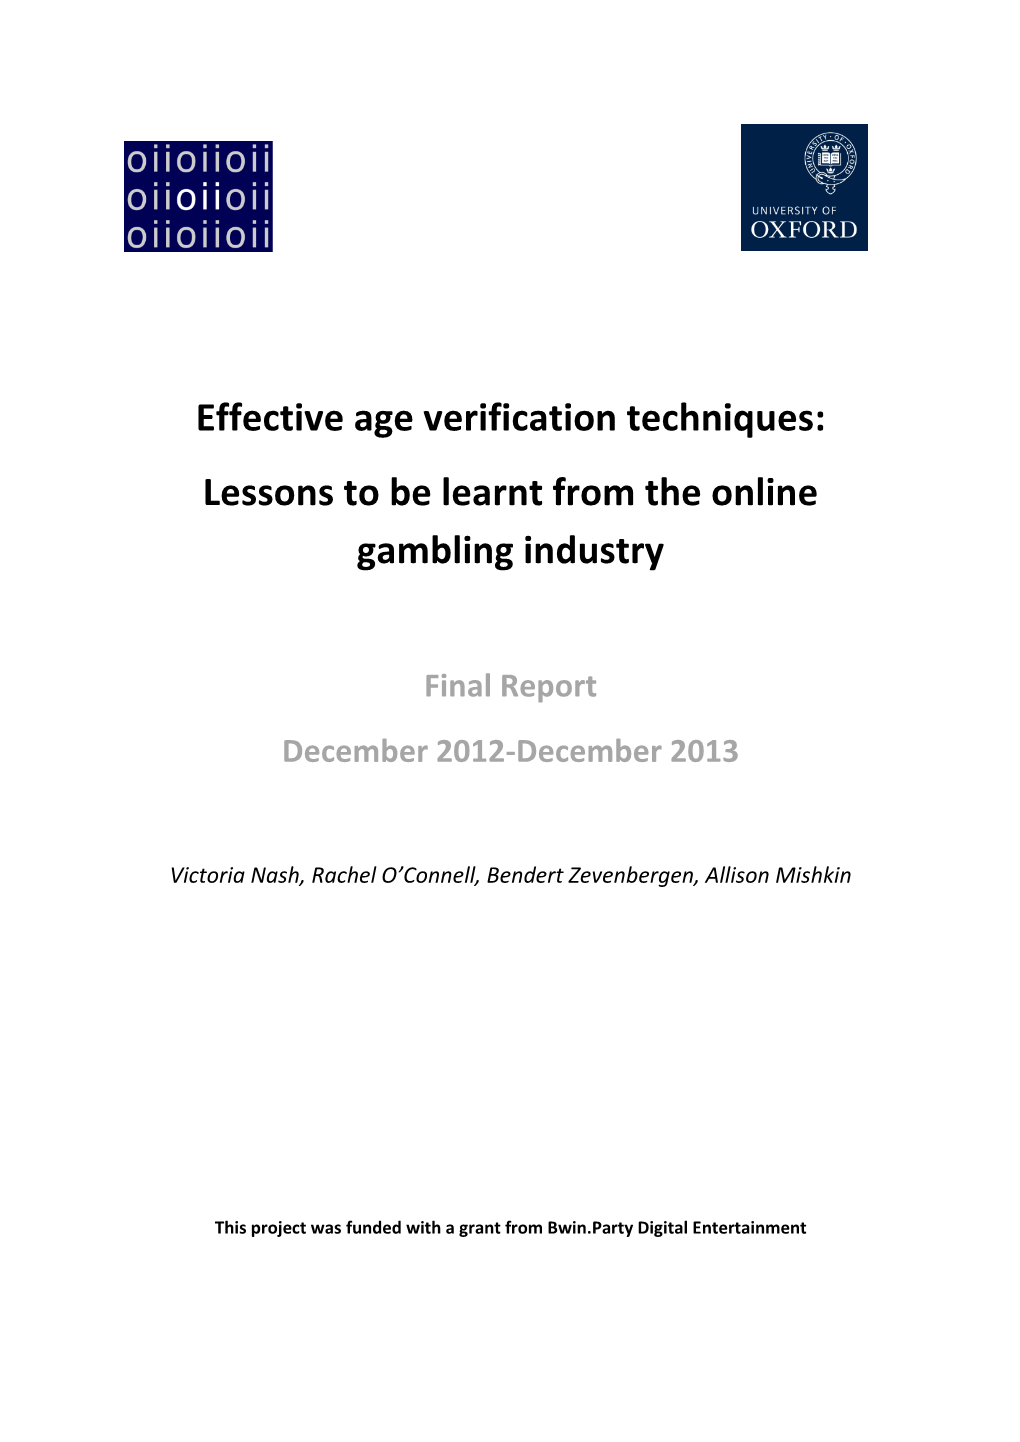 Effective Age Verification Techniques: Lessons to Be Learnt from the Online Gambling Industry